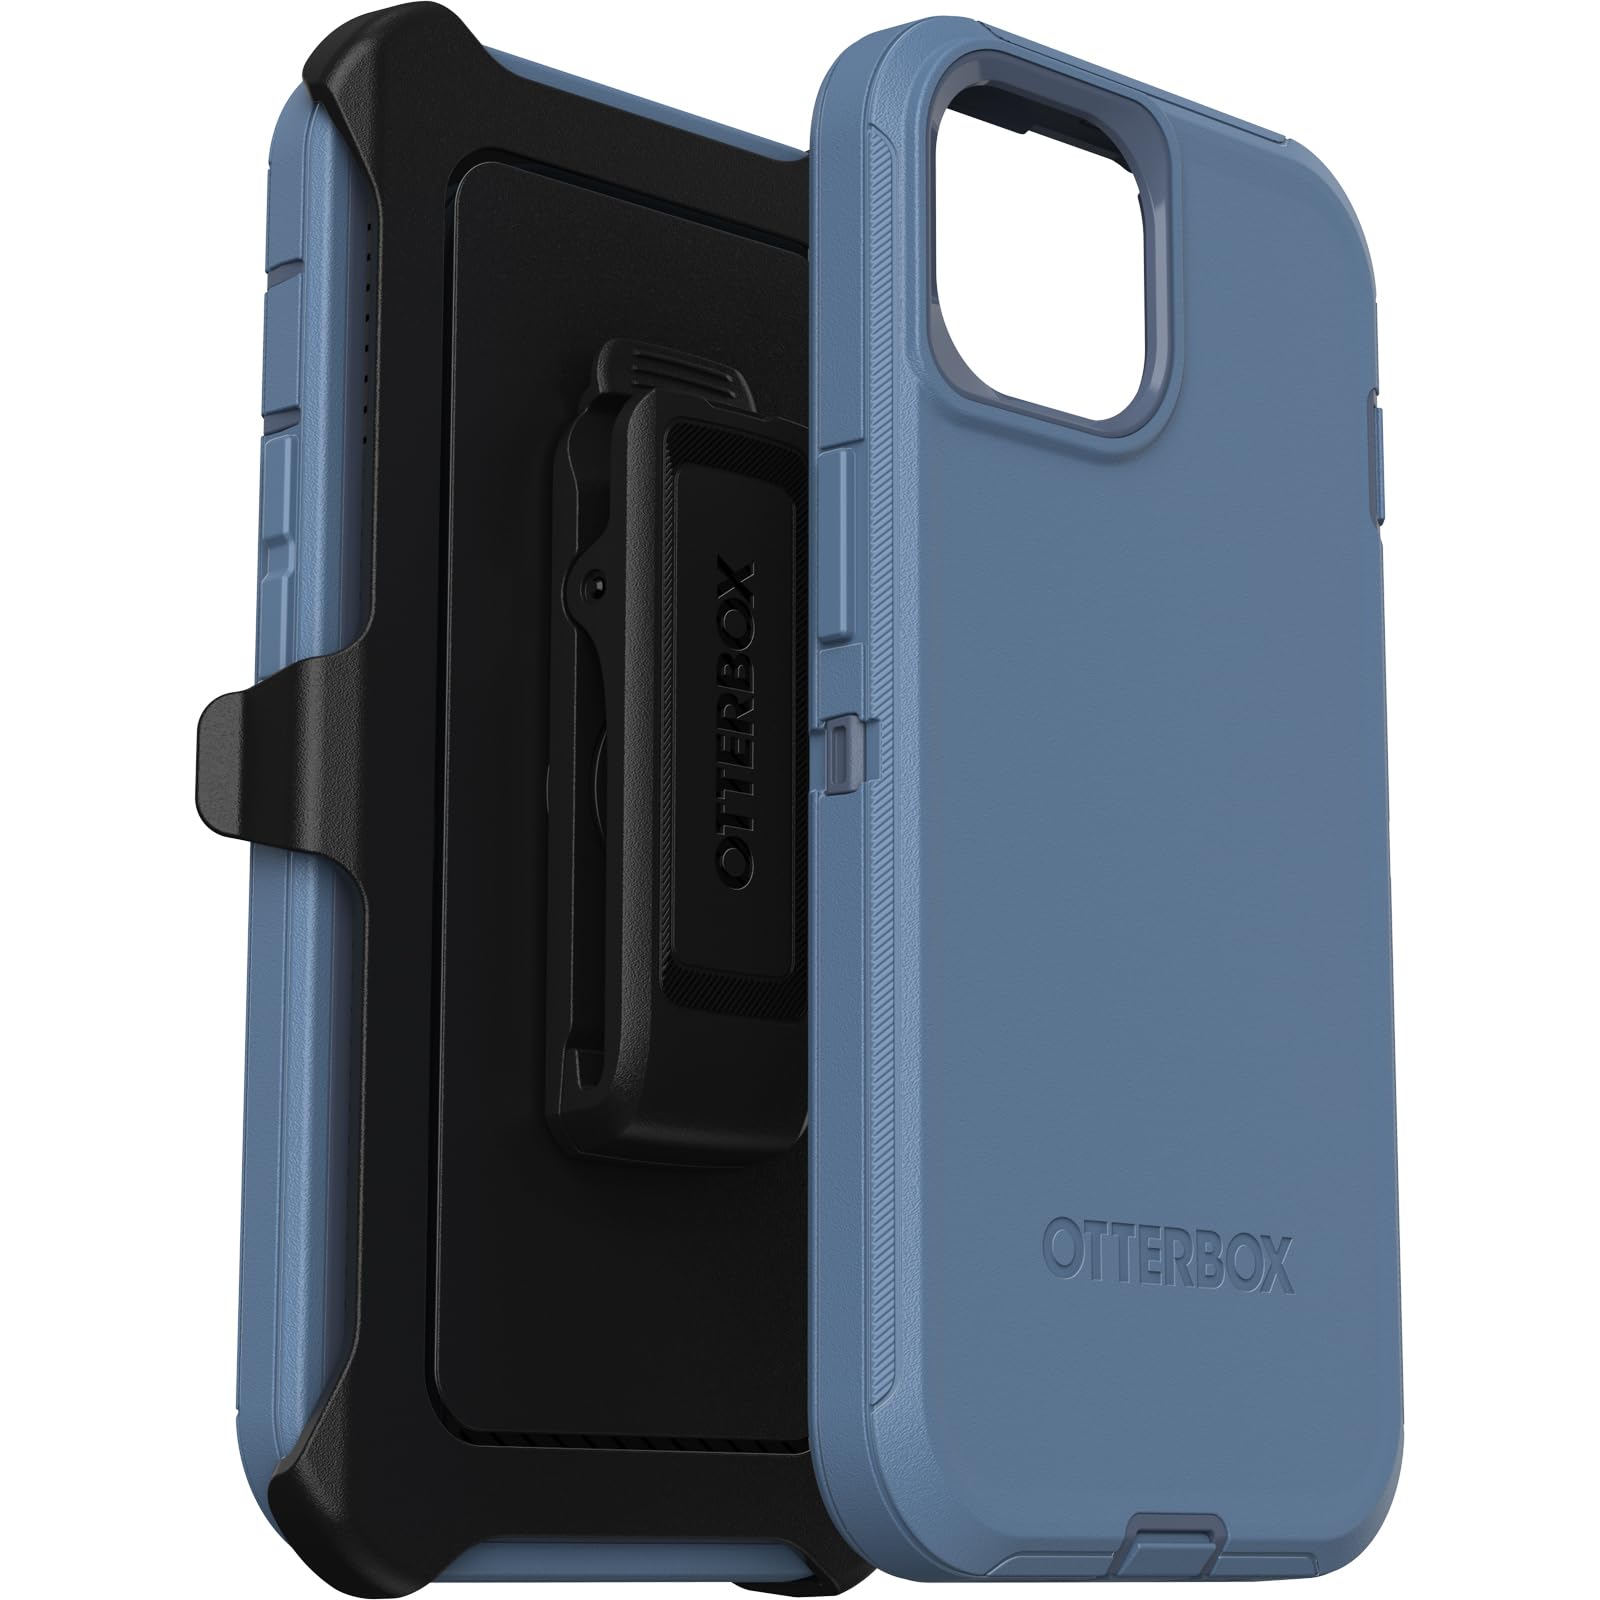 OtterBox iPhone 15, iPhone 14, and iPhone 13 Defender Series Case - BABY BLUE JEANS (Blue), screenless, rugged & durable, with port protection, includes holster clip kickstand